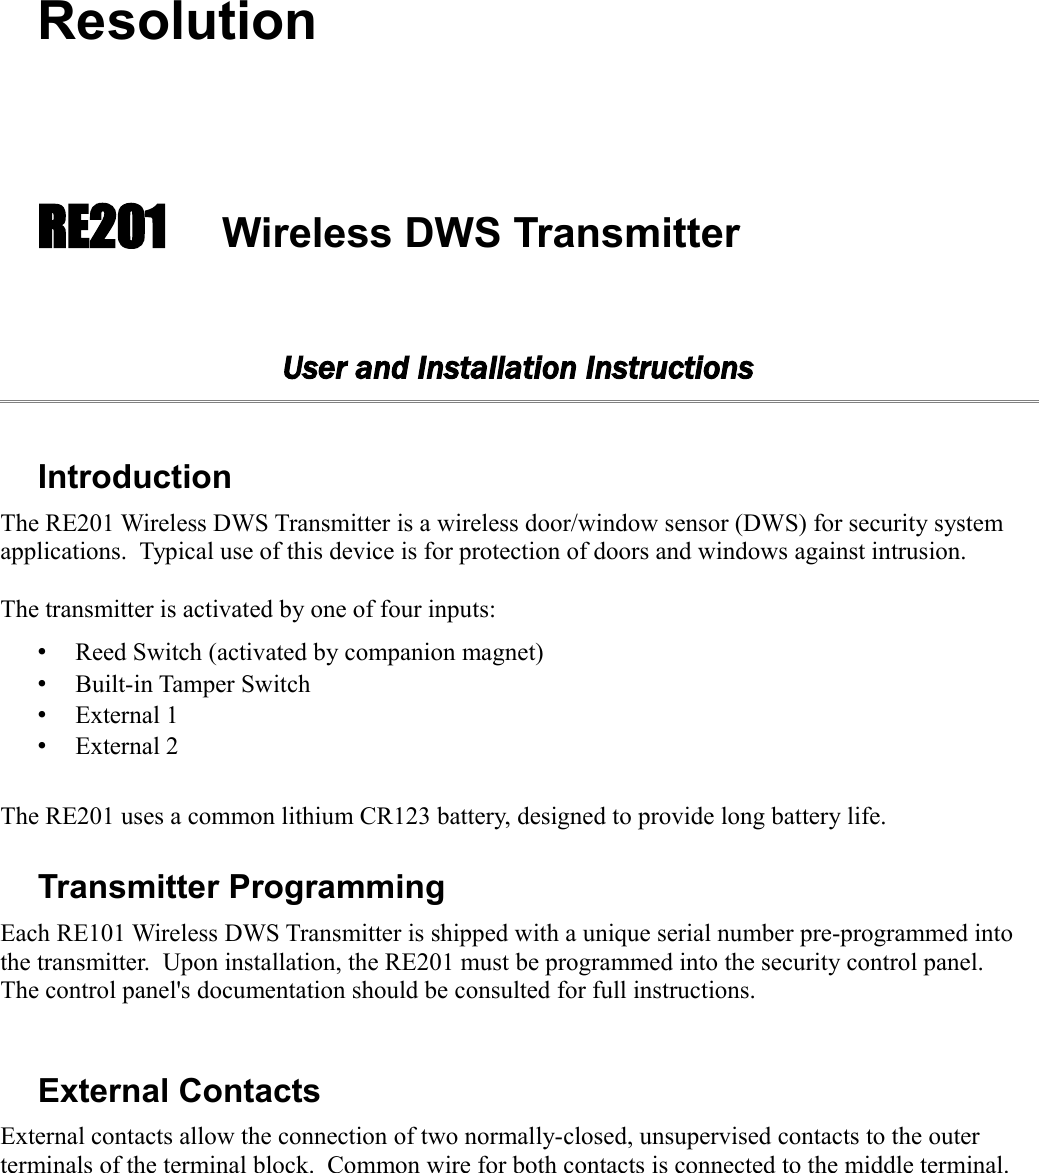 ResolutionRE201 Wireless DWS TransmitterUser and Installation InstructionsIntroductionThe RE201 Wireless DWS Transmitter is a wireless door/window sensor (DWS) for security system applications.  Typical use of this device is for protection of doors and windows against intrusion.  The transmitter is activated by one of four inputs:•Reed Switch (activated by companion magnet)•Built-in Tamper Switch•External 1 •External 2The RE201 uses a common lithium CR123 battery, designed to provide long battery life.  Transmitter ProgrammingEach RE101 Wireless DWS Transmitter is shipped with a unique serial number pre-programmed into the transmitter.  Upon installation, the RE201 must be programmed into the security control panel. The control panel&apos;s documentation should be consulted for full instructions.External ContactsExternal contacts allow the connection of two normally-closed, unsupervised contacts to the outer terminals of the terminal block.  Common wire for both contacts is connected to the middle terminal.